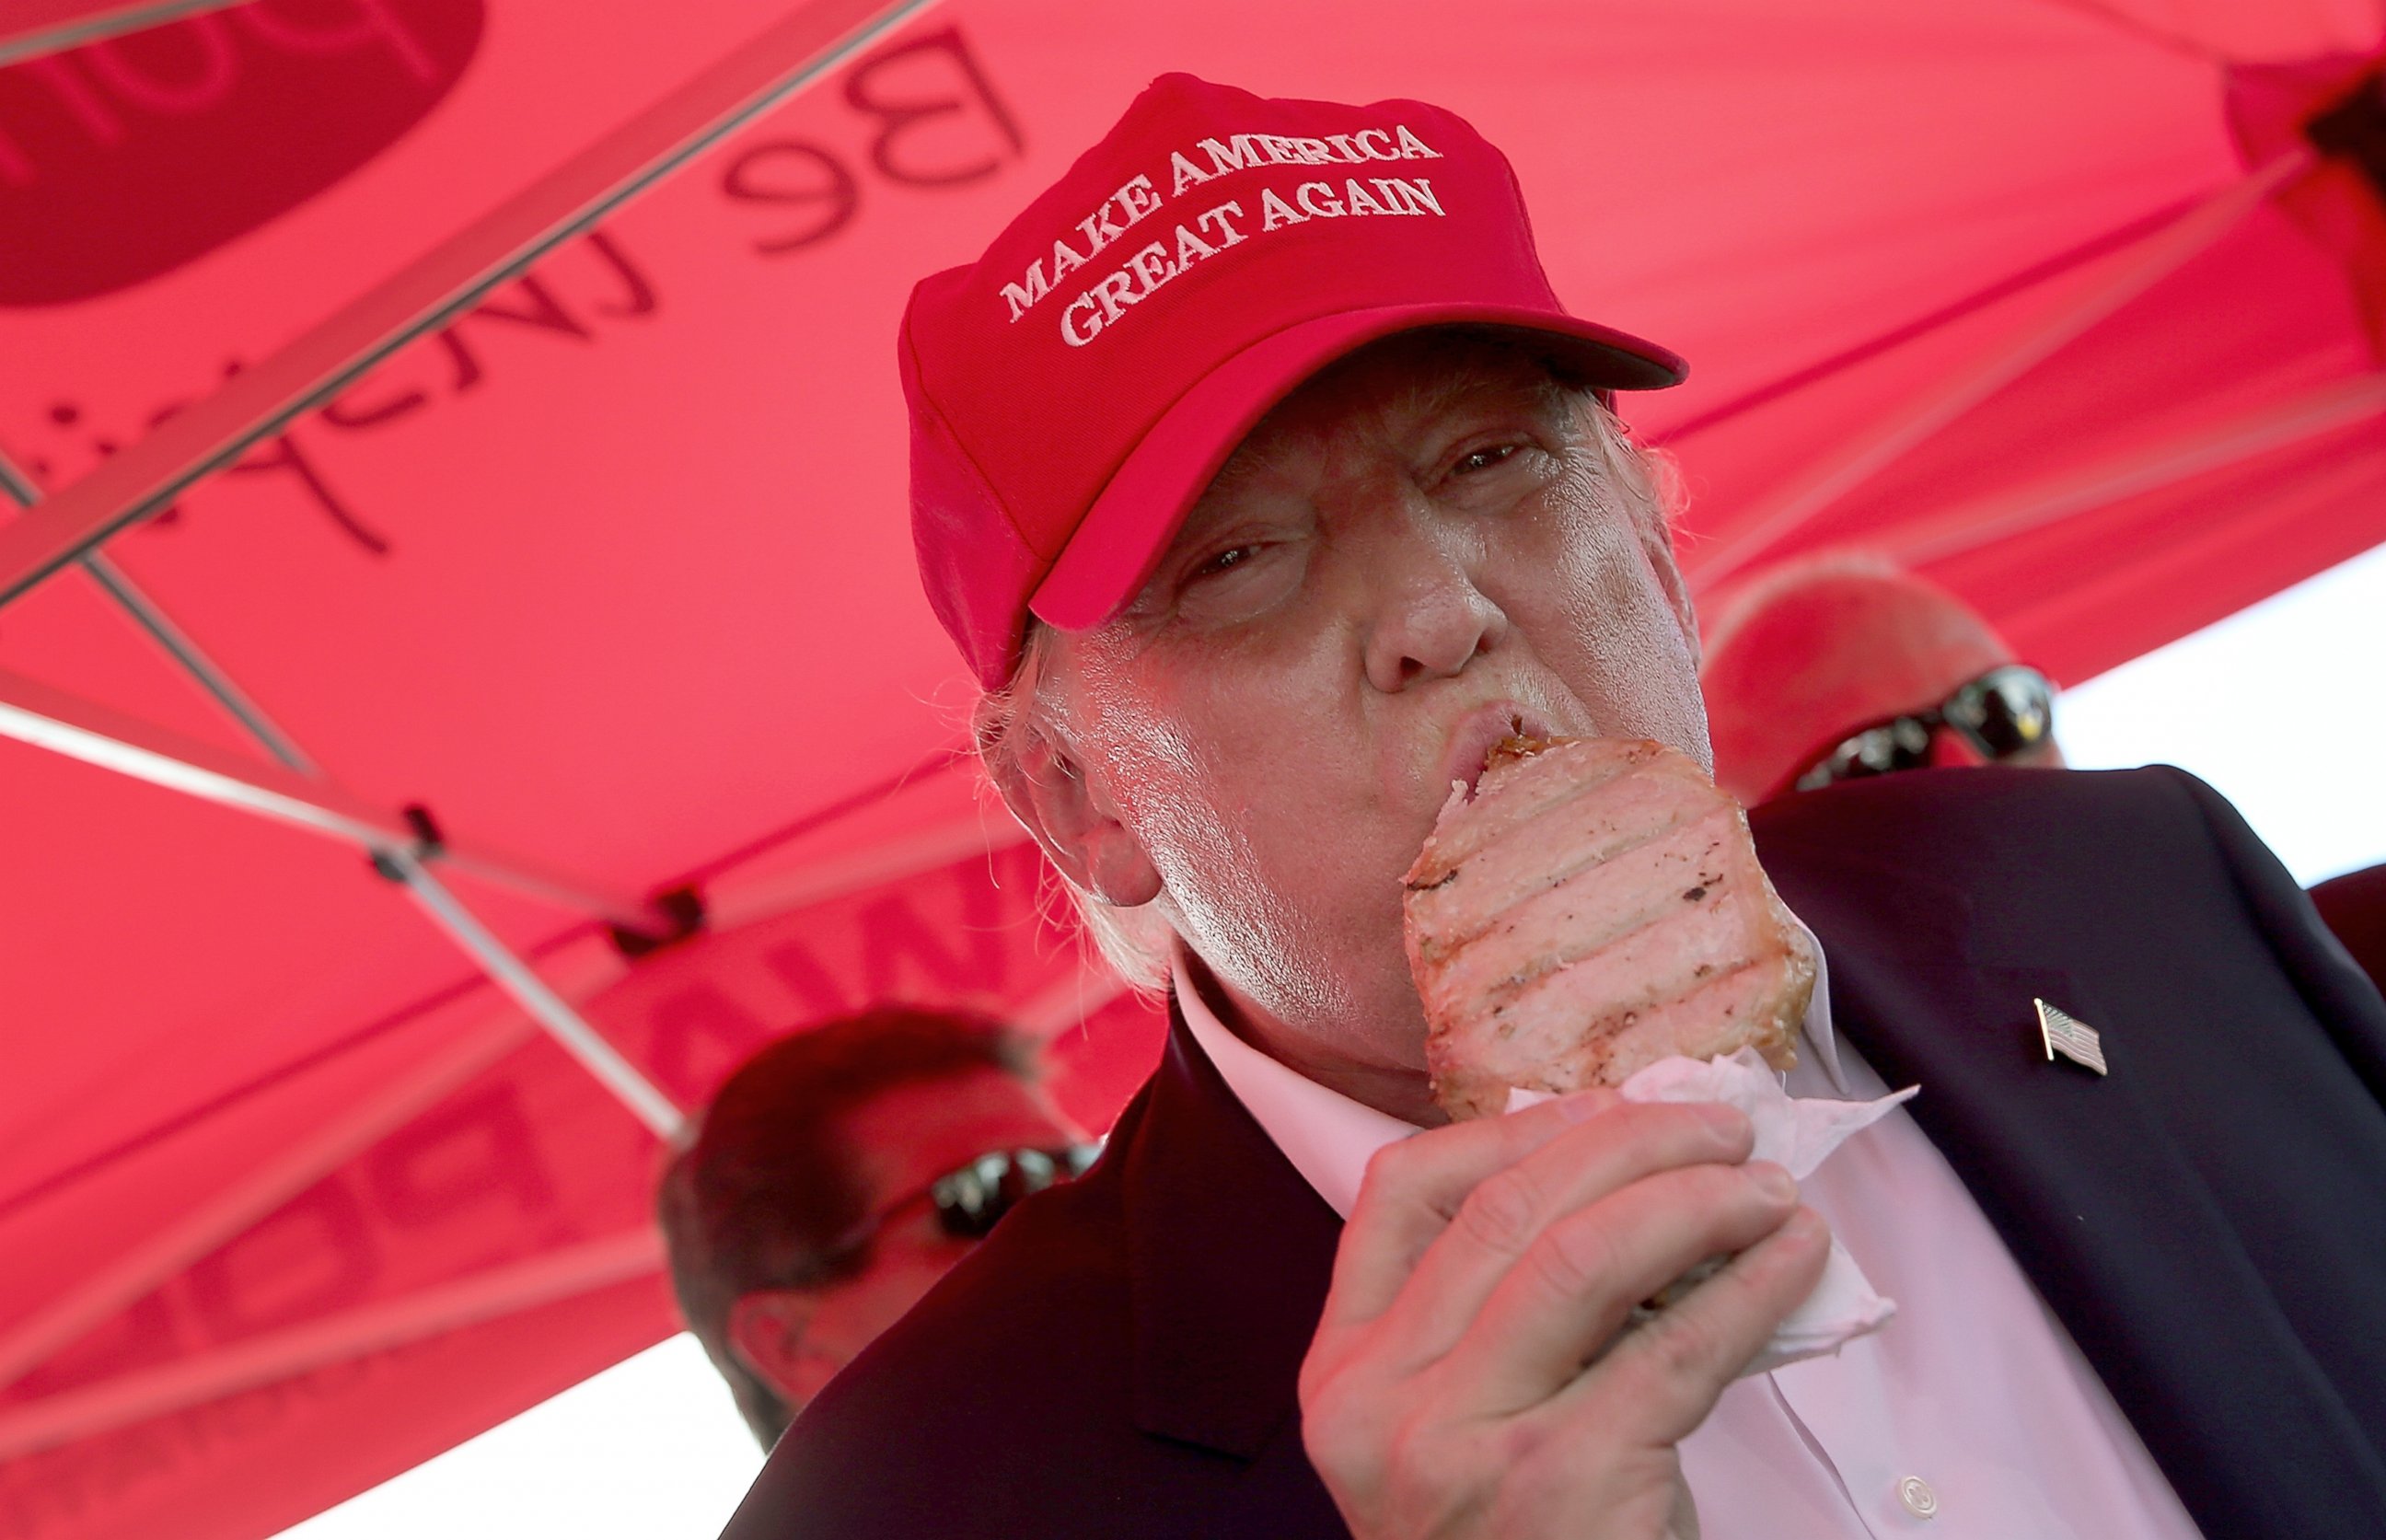 PHOTO: Republican presidential candidate Donald Trump eats a pork chop on a stick and gives a thumbs up sign to fairgoers at the Iowa State Fair, August 15, 2015, in Des Moines, Iowa.